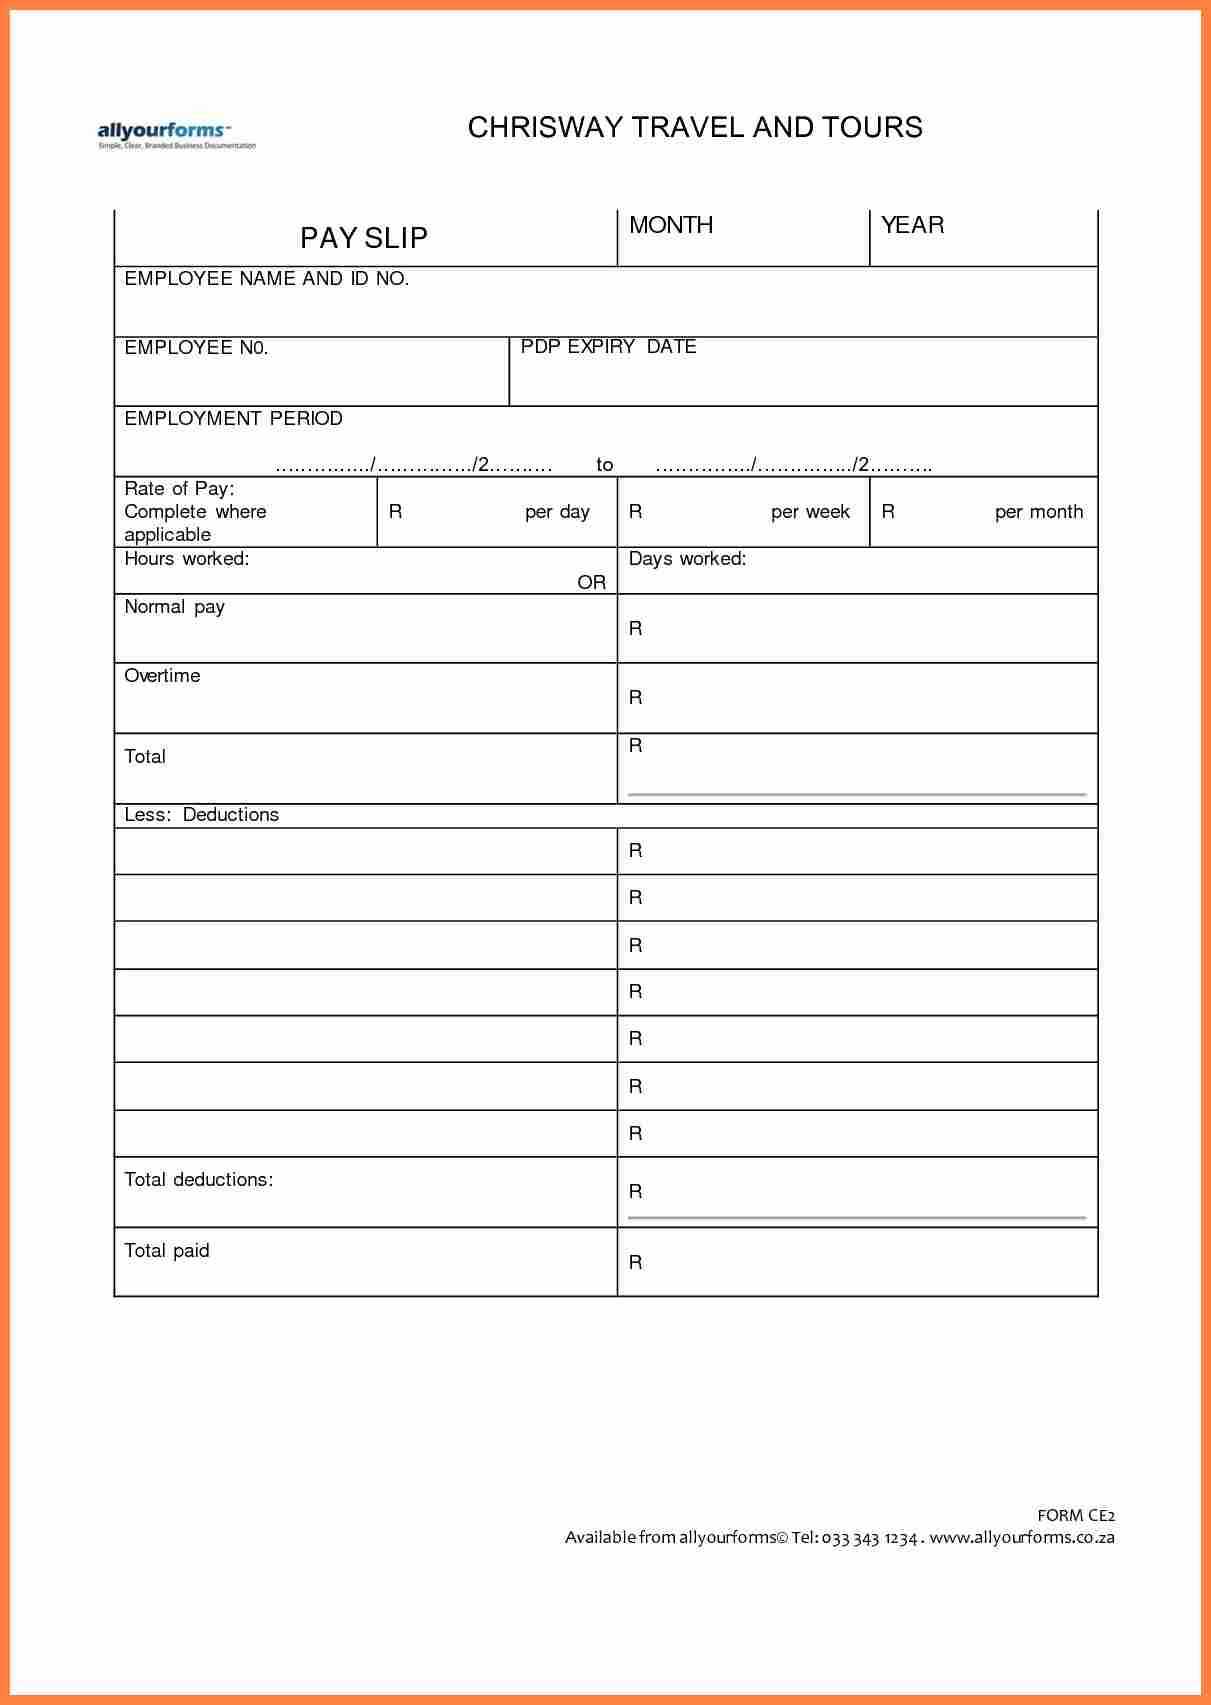 2F7D Payroll Payslip Template | Wiring Library Within Blank Payslip Template